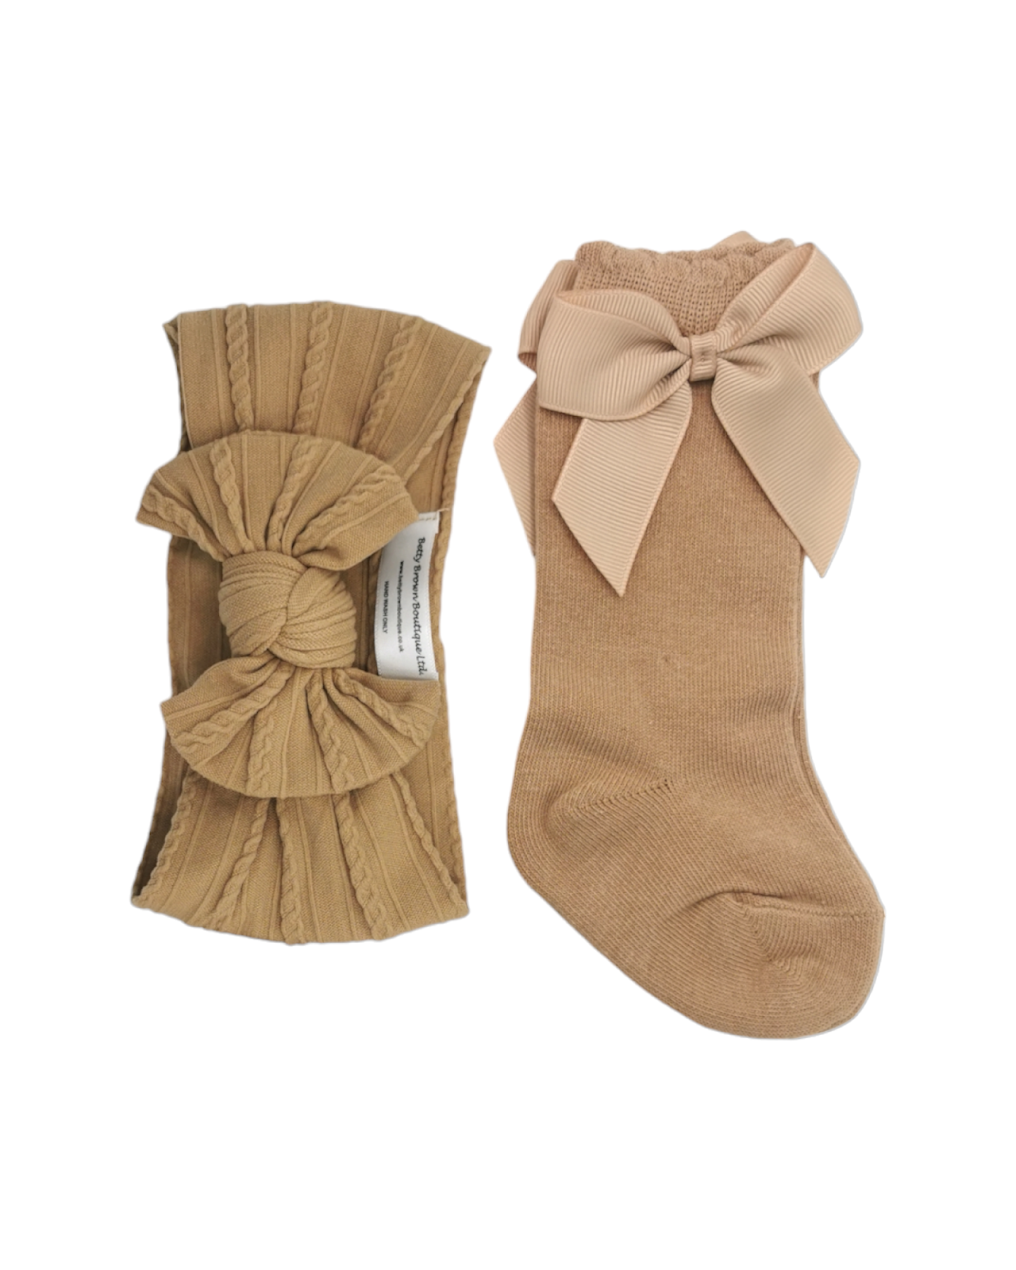 Our Coffee Smaller Headwrap & Knee High Socks Set - Betty Brown Boutique Ltd